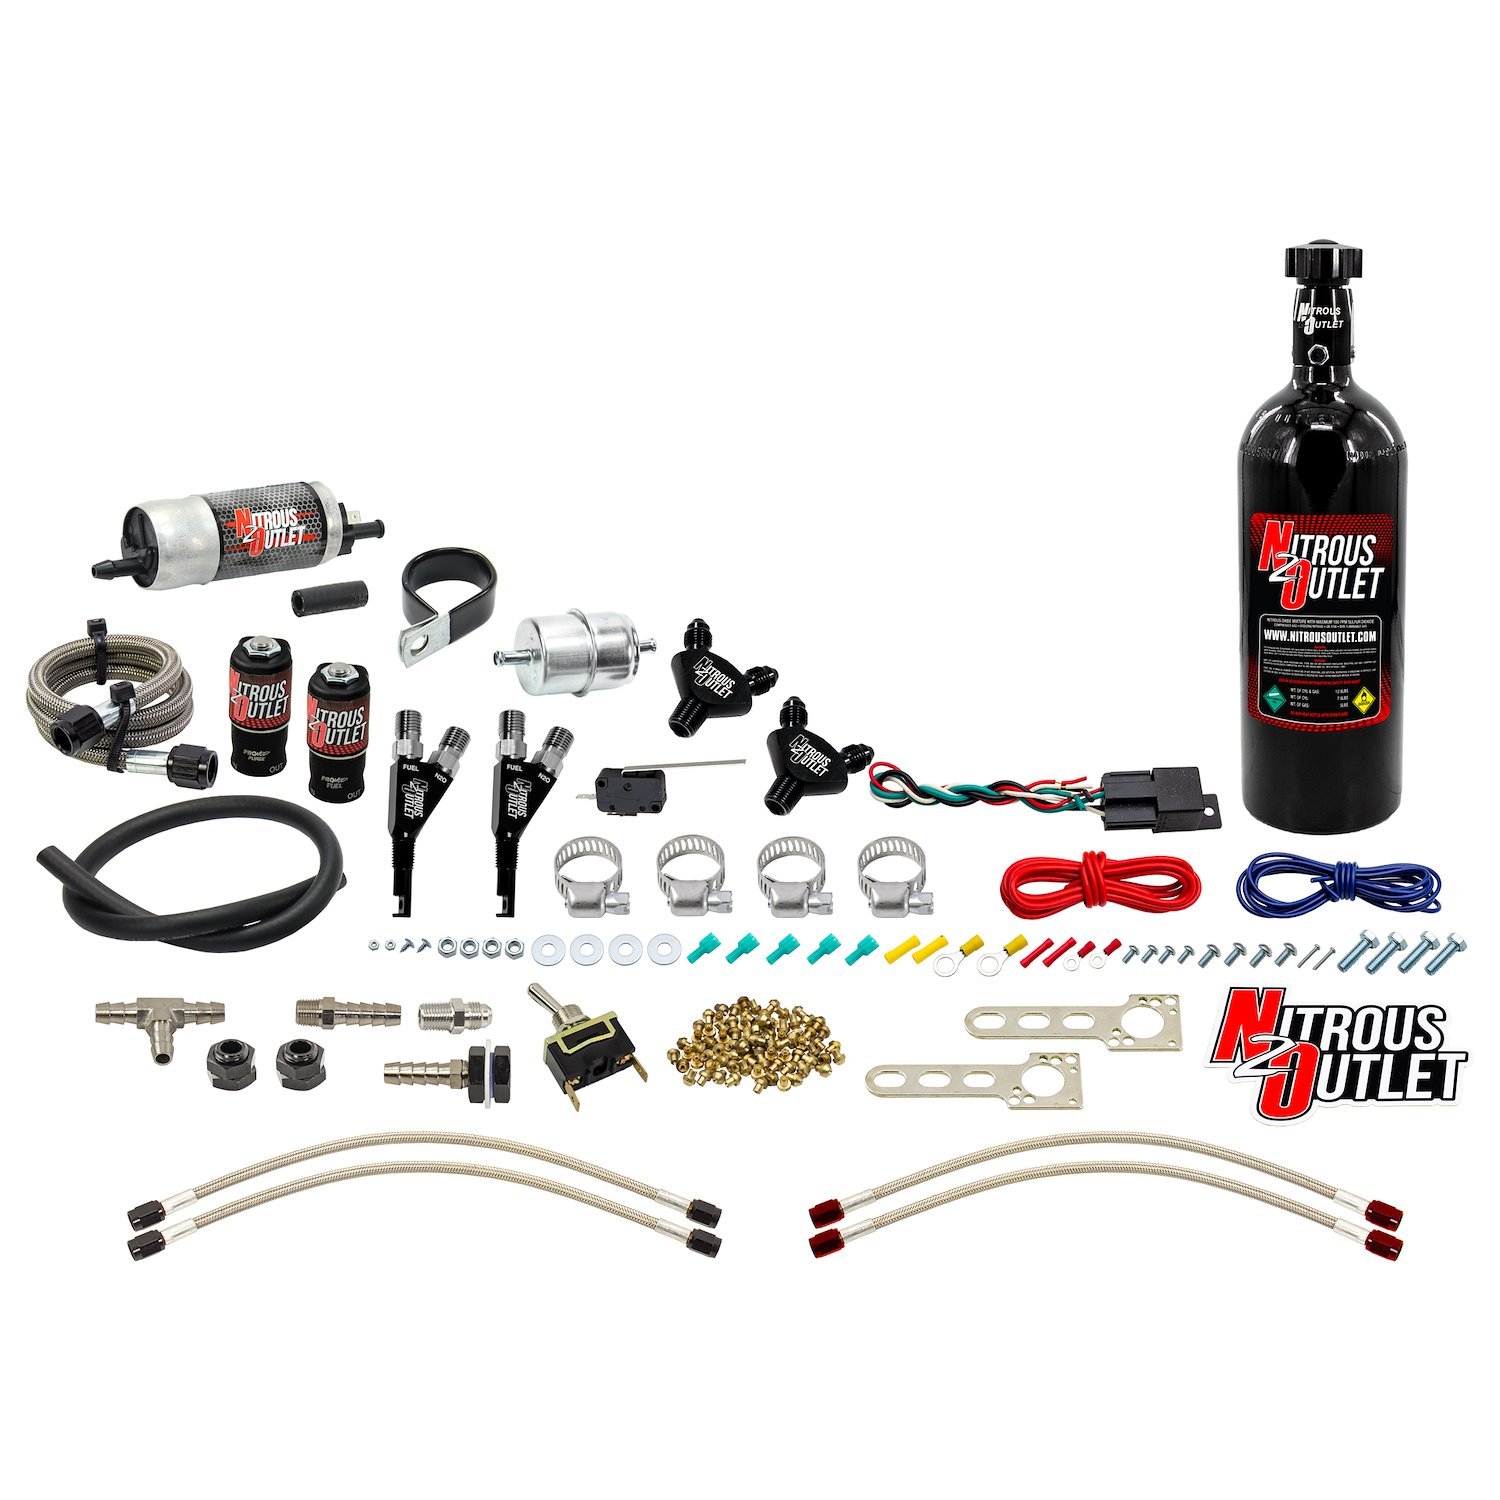 50-10020-5 Powersports Twin-Cyl Wet Nozzle System, Aluminum 90-Degree Nozzles, Gas, 6 psi, 2030405060 HP, 5LB Bottle